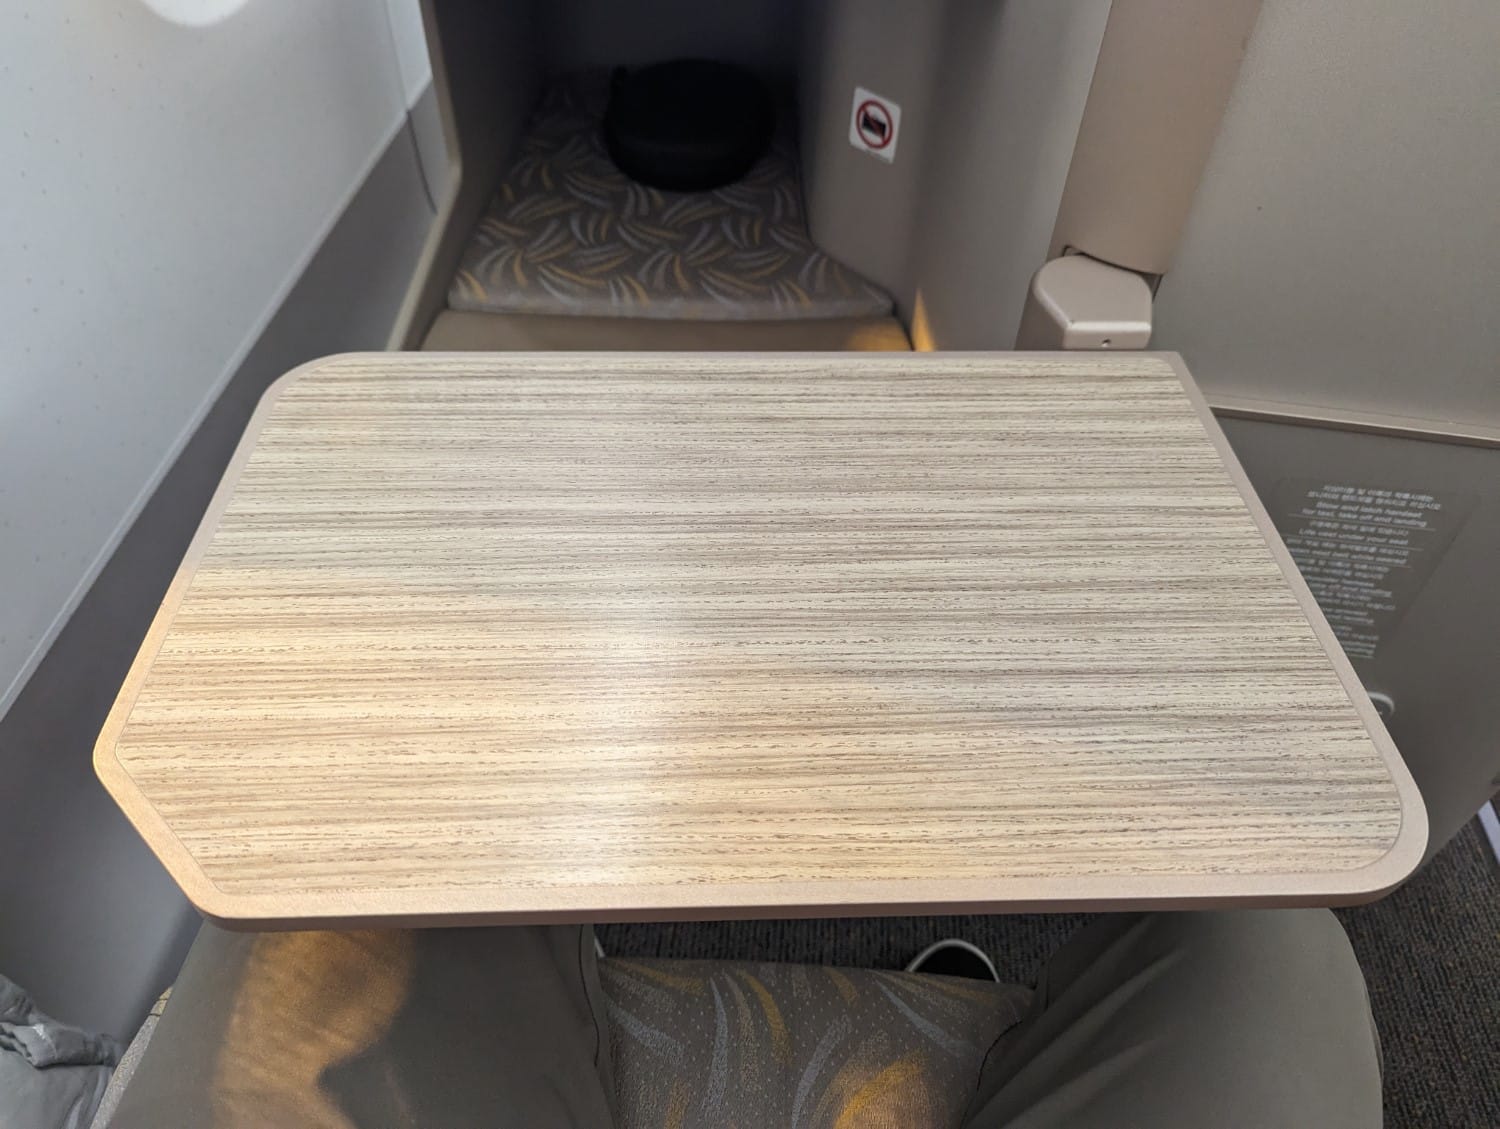 asiana airlines business class a350 tray table